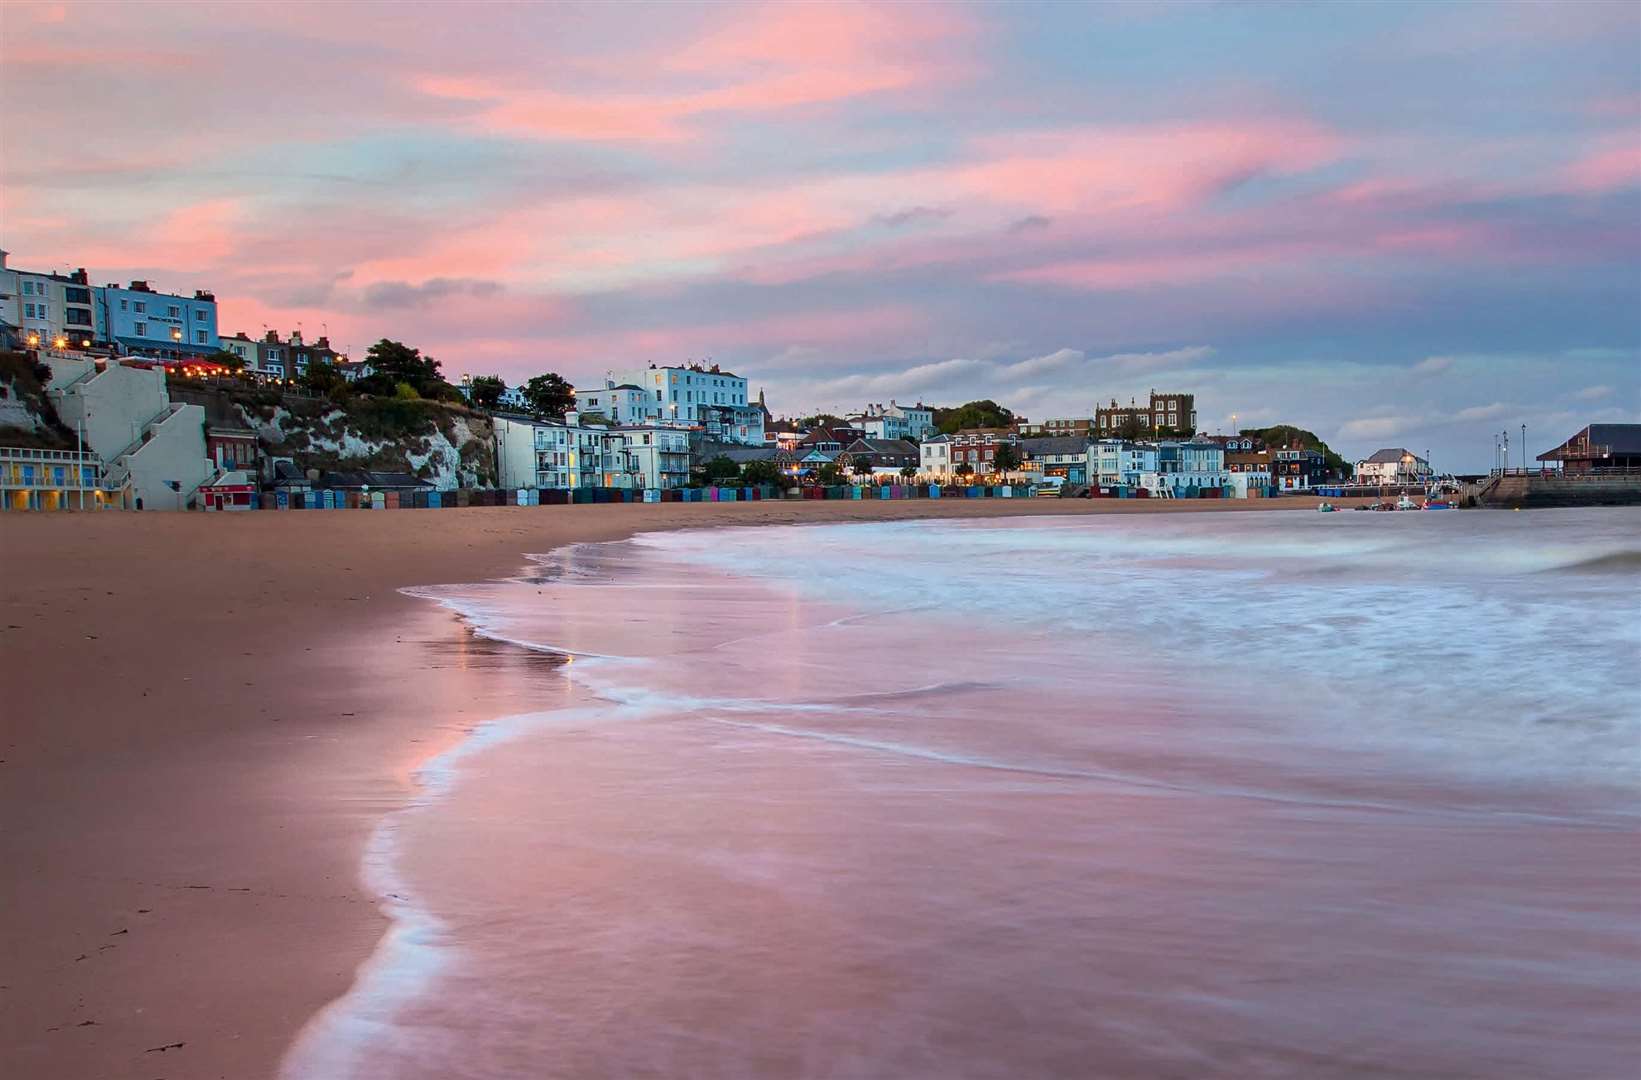 Broadstairs beach regularly attracts large number of tourists. Picture: VisitKent